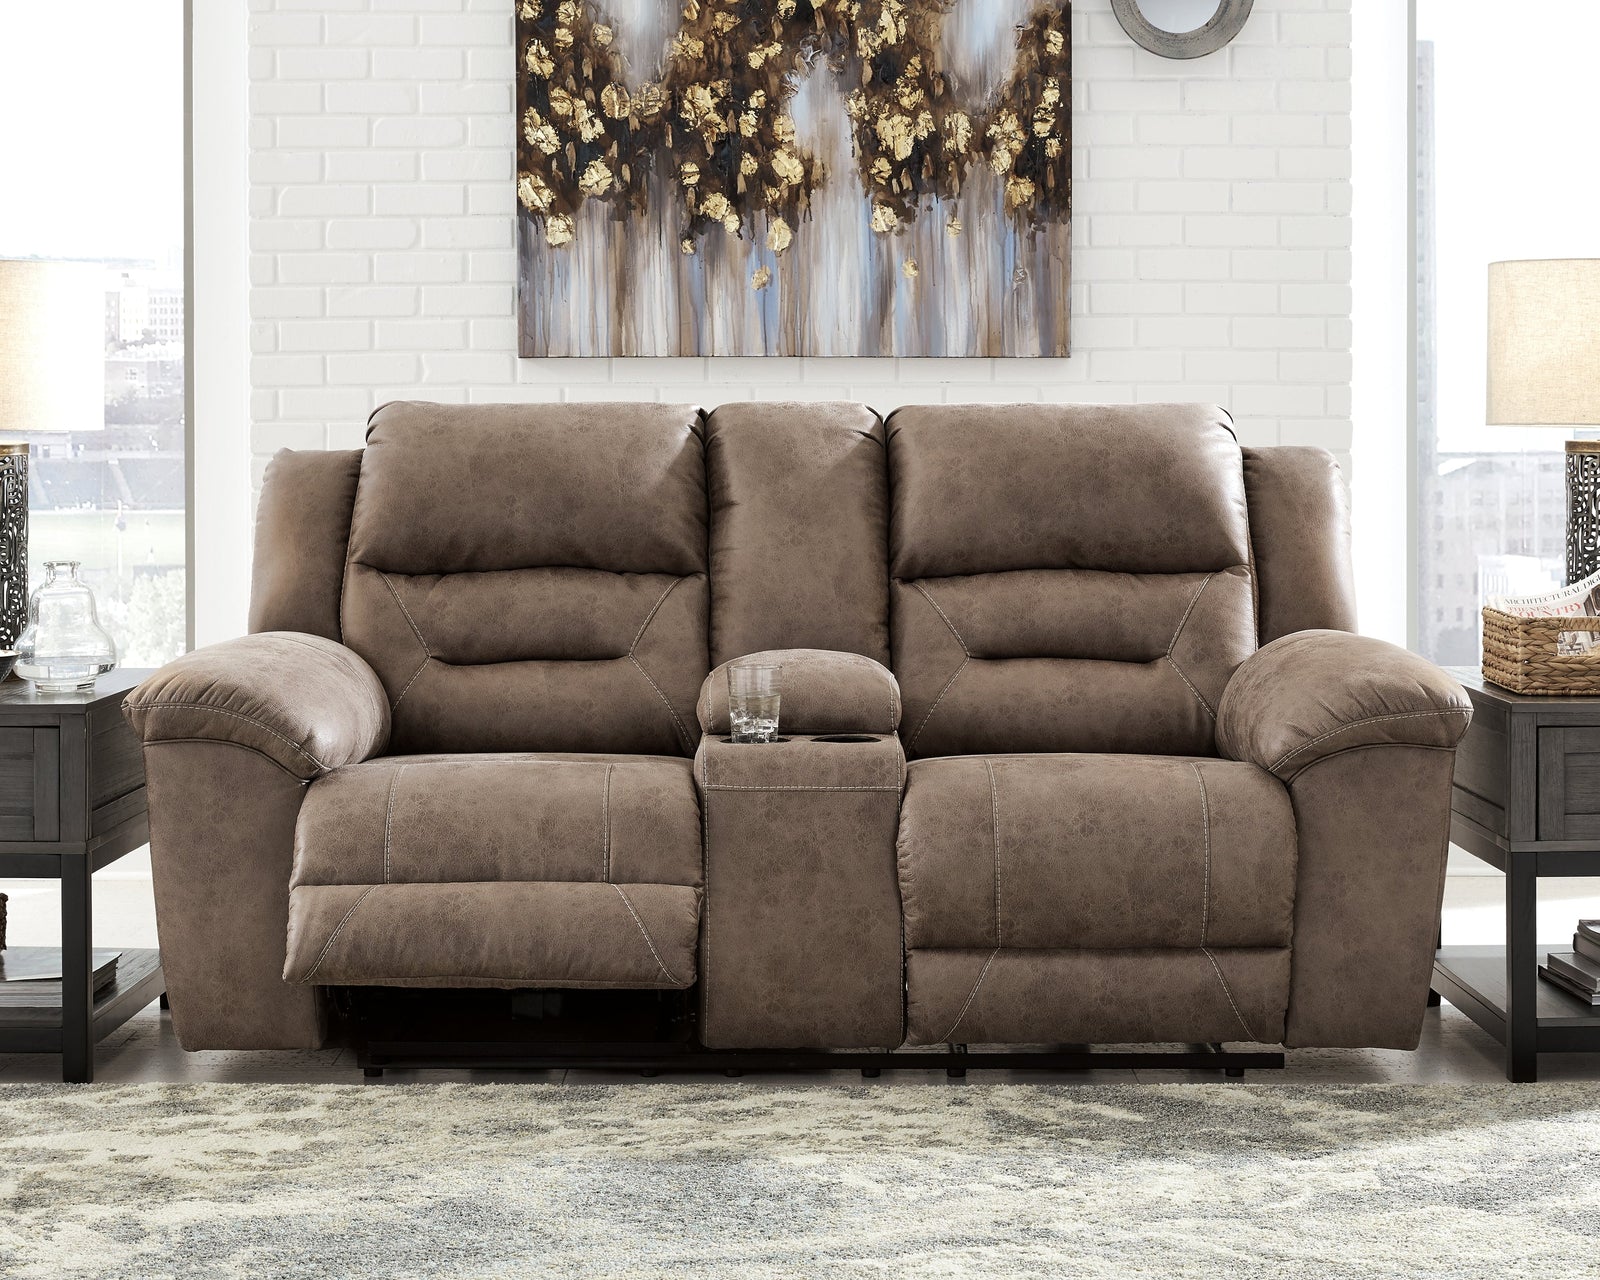 Stoneland Fossil Faux Leather Power Reclining Loveseat With Console